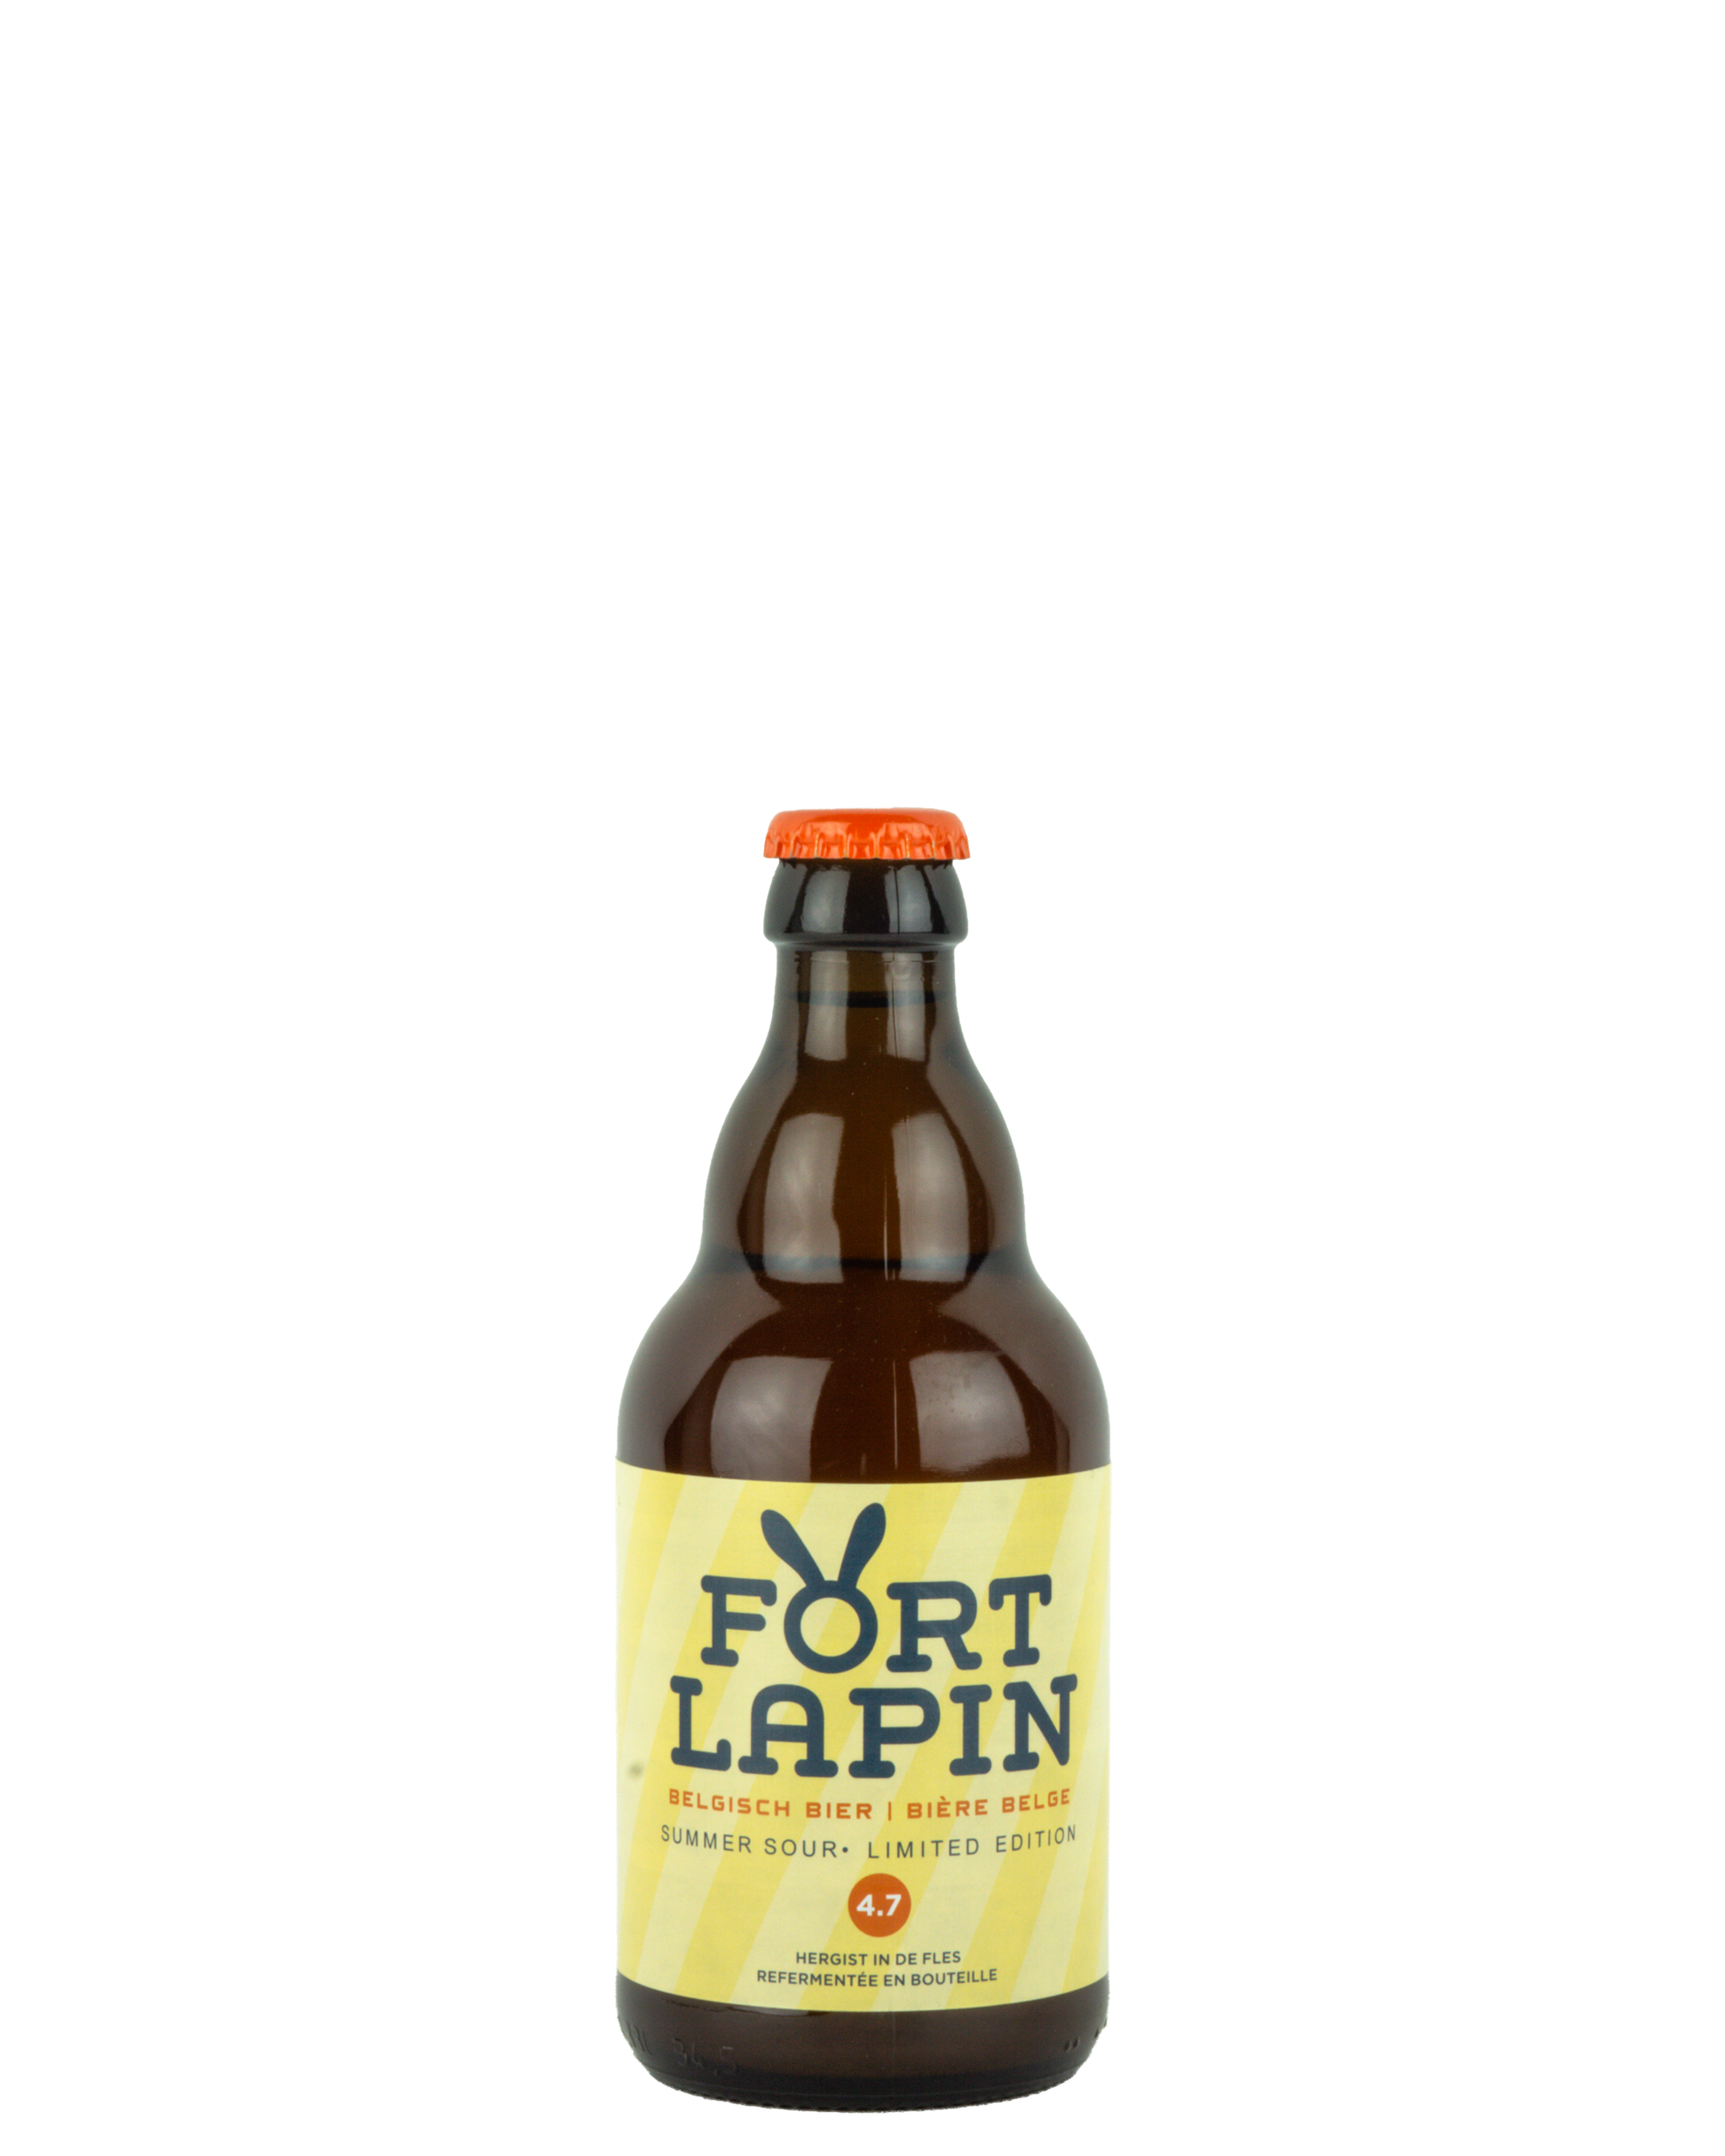 Fort Lapin 4,7 SummerSour 33Cl